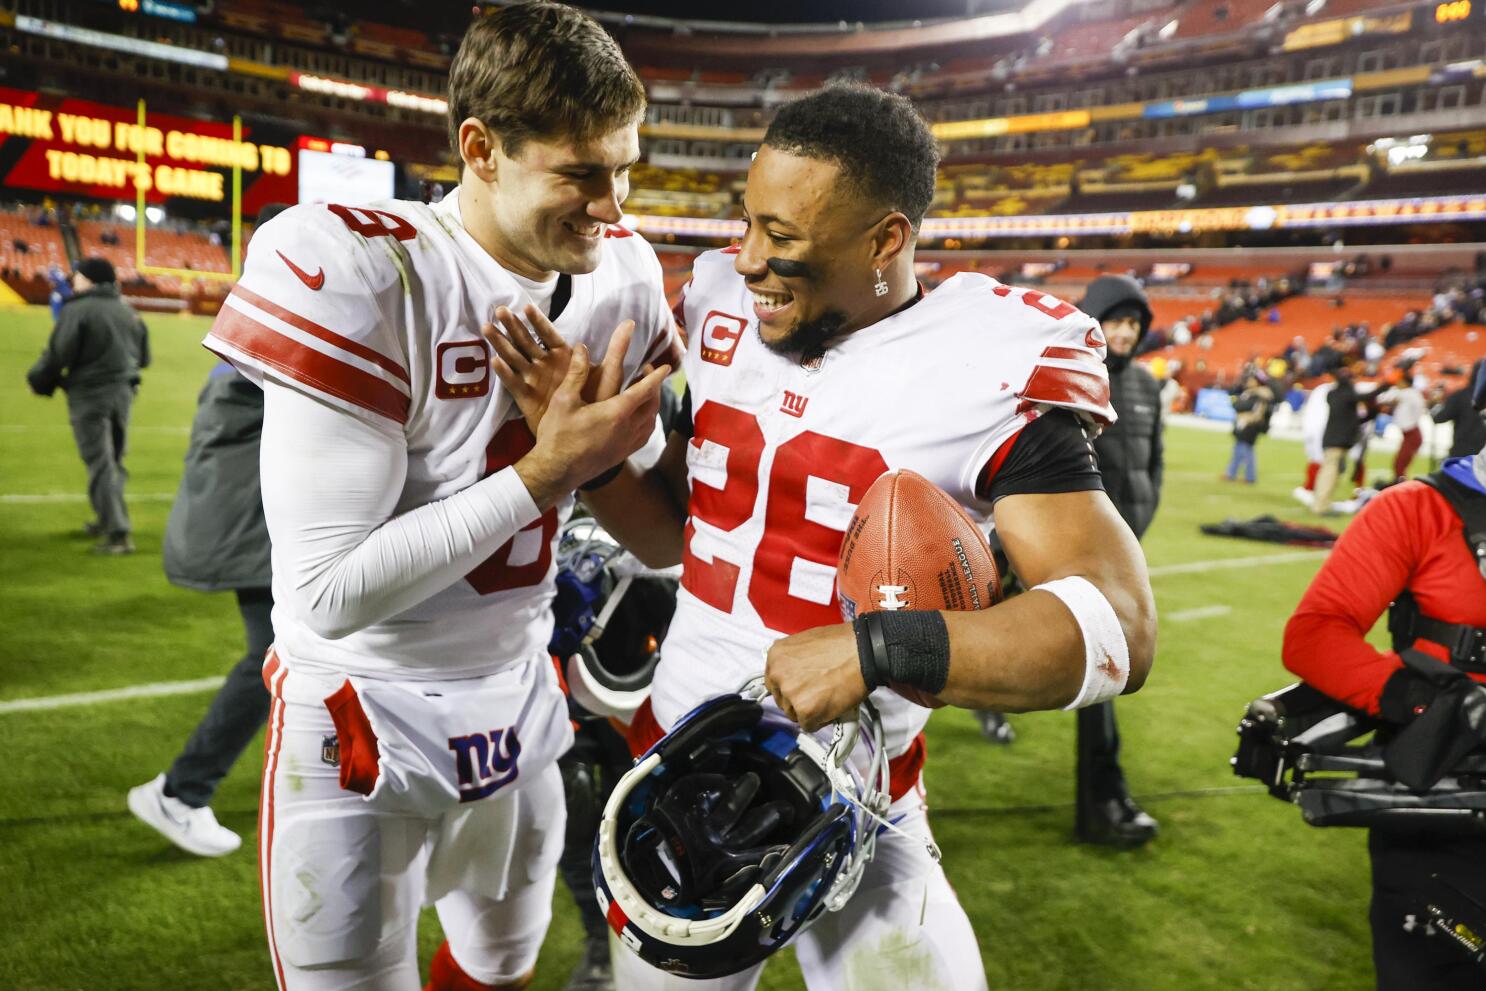 Giants' playoff hopes are brighter after win over Commanders